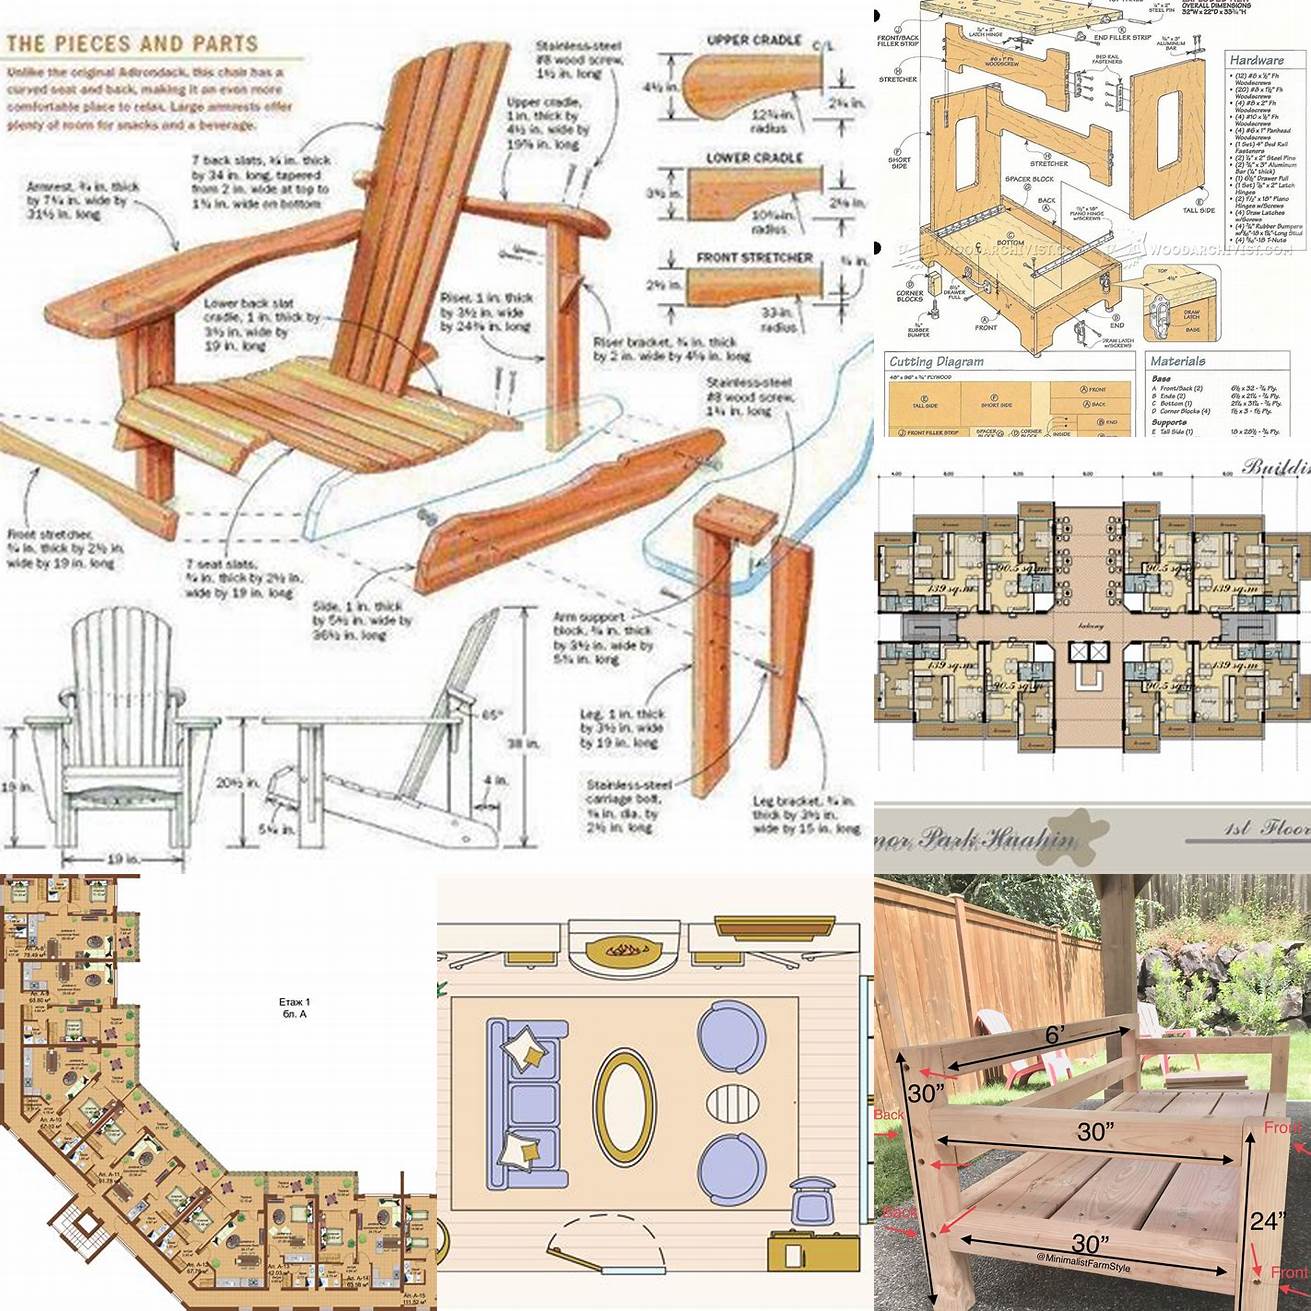 Complexity Some furniture plans can be very complex and difficult to follow especially for beginners This can lead to frustration and errors in the construction process